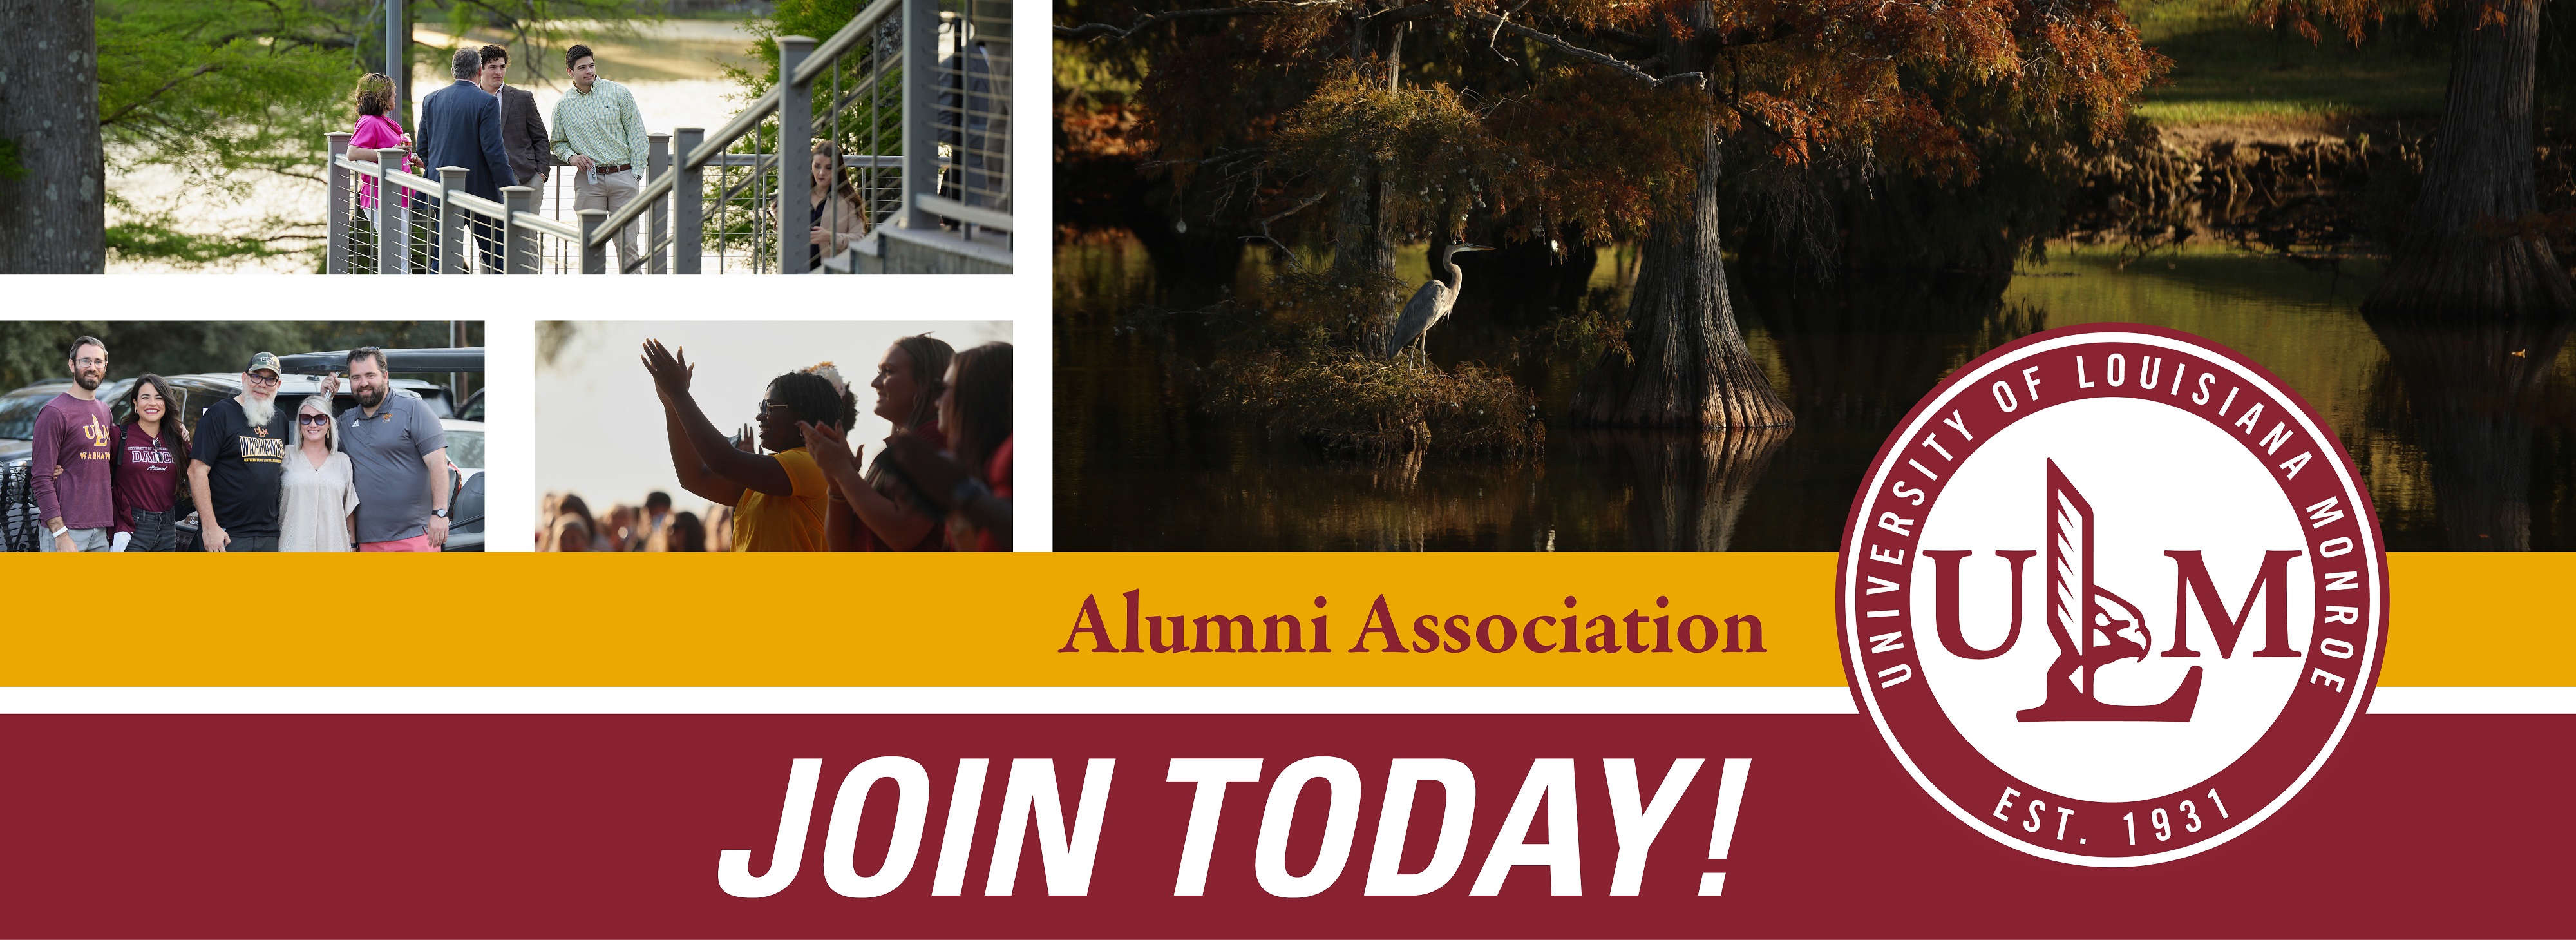 ɫAV Alumni association logo with text that reads, "JOIN TODAY!" and a collage of pictures from around campus.